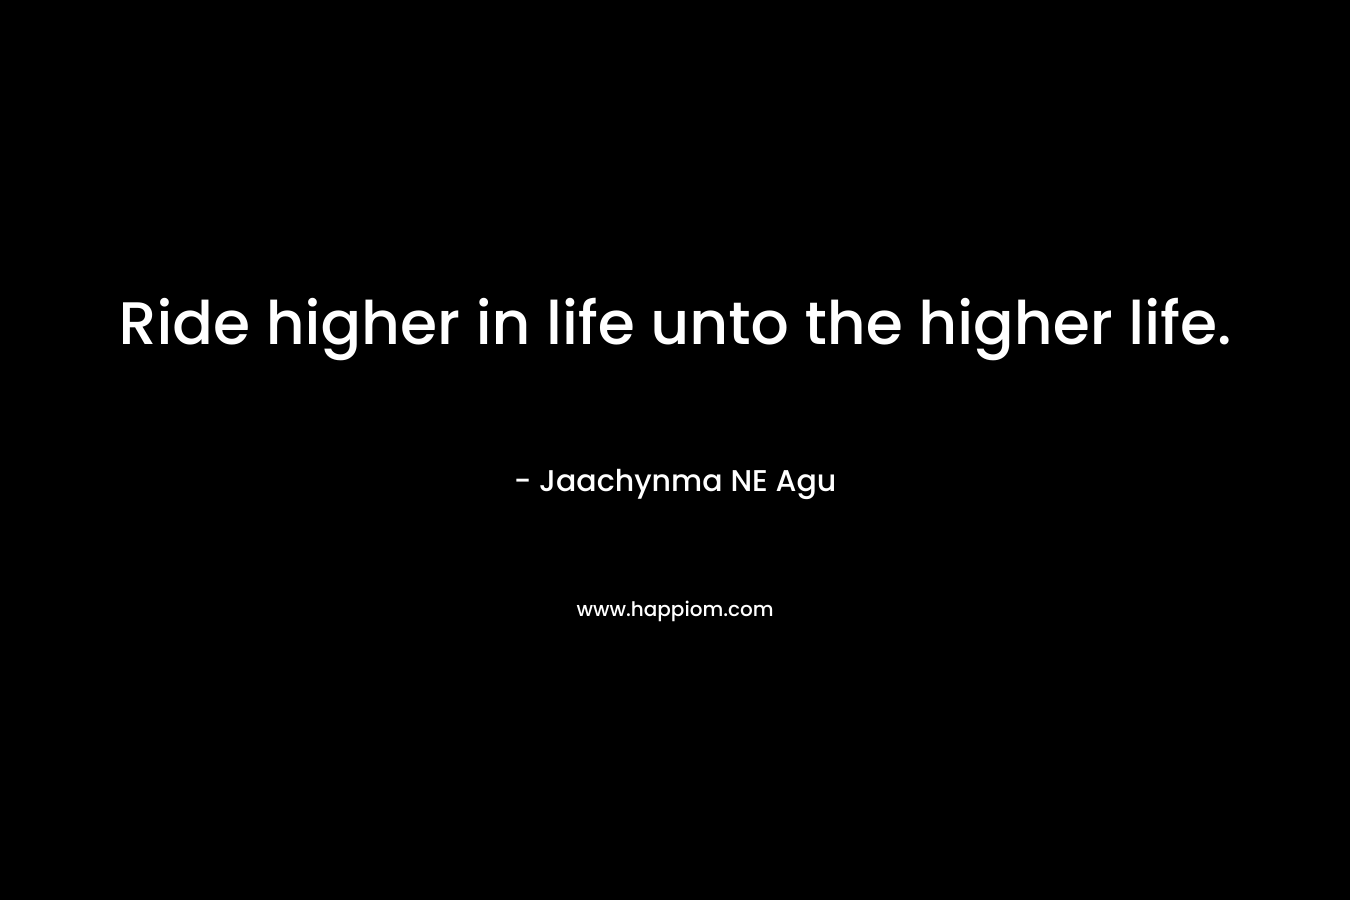 Ride higher in life unto the higher life.